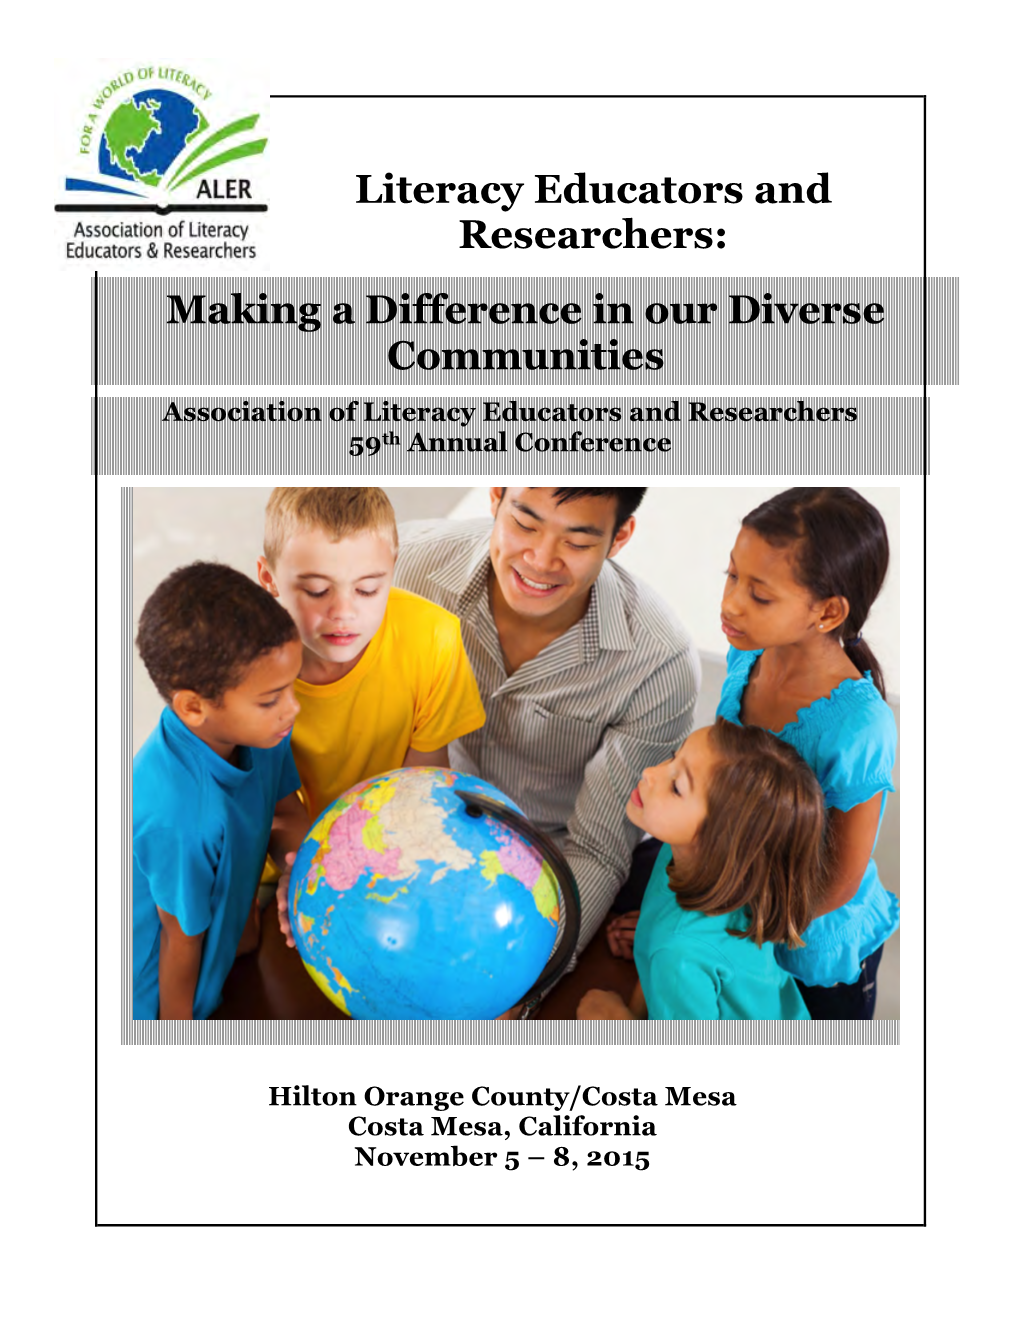 Literacy Educators and Researchers: Making a Difference in Our Diverse